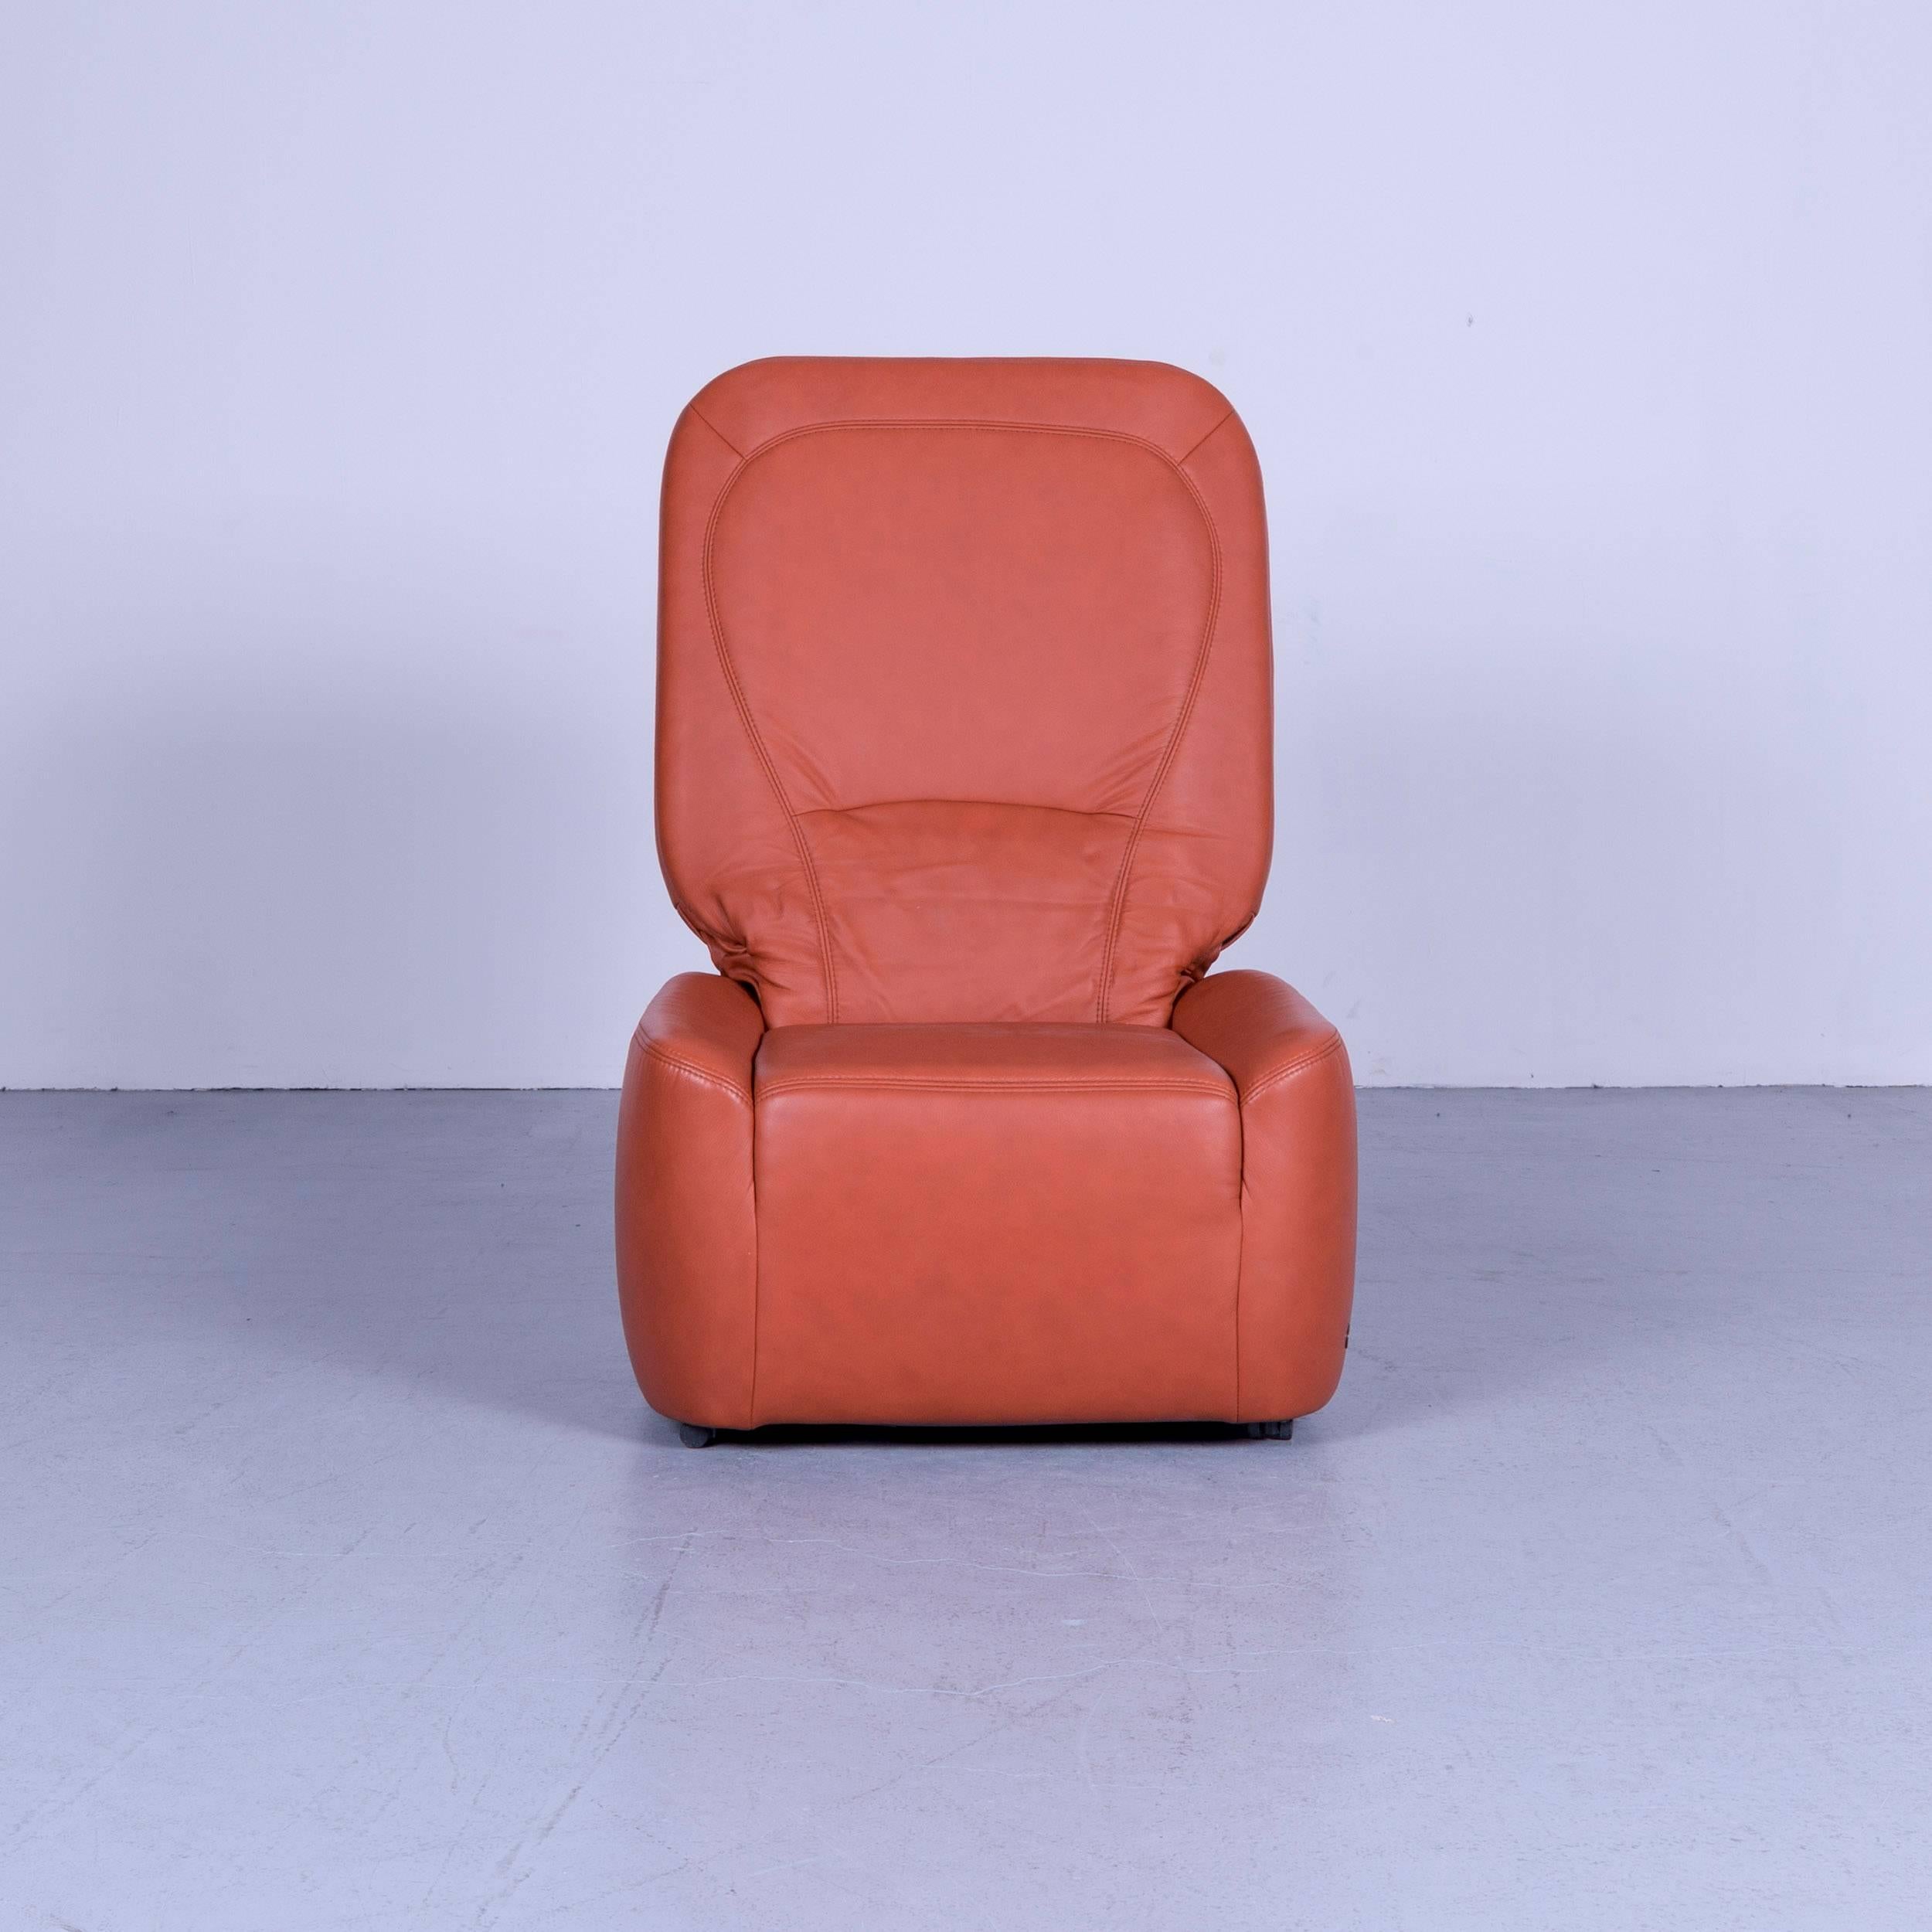 Orange colored Himolla foot stool made of leather convertible to a chair.